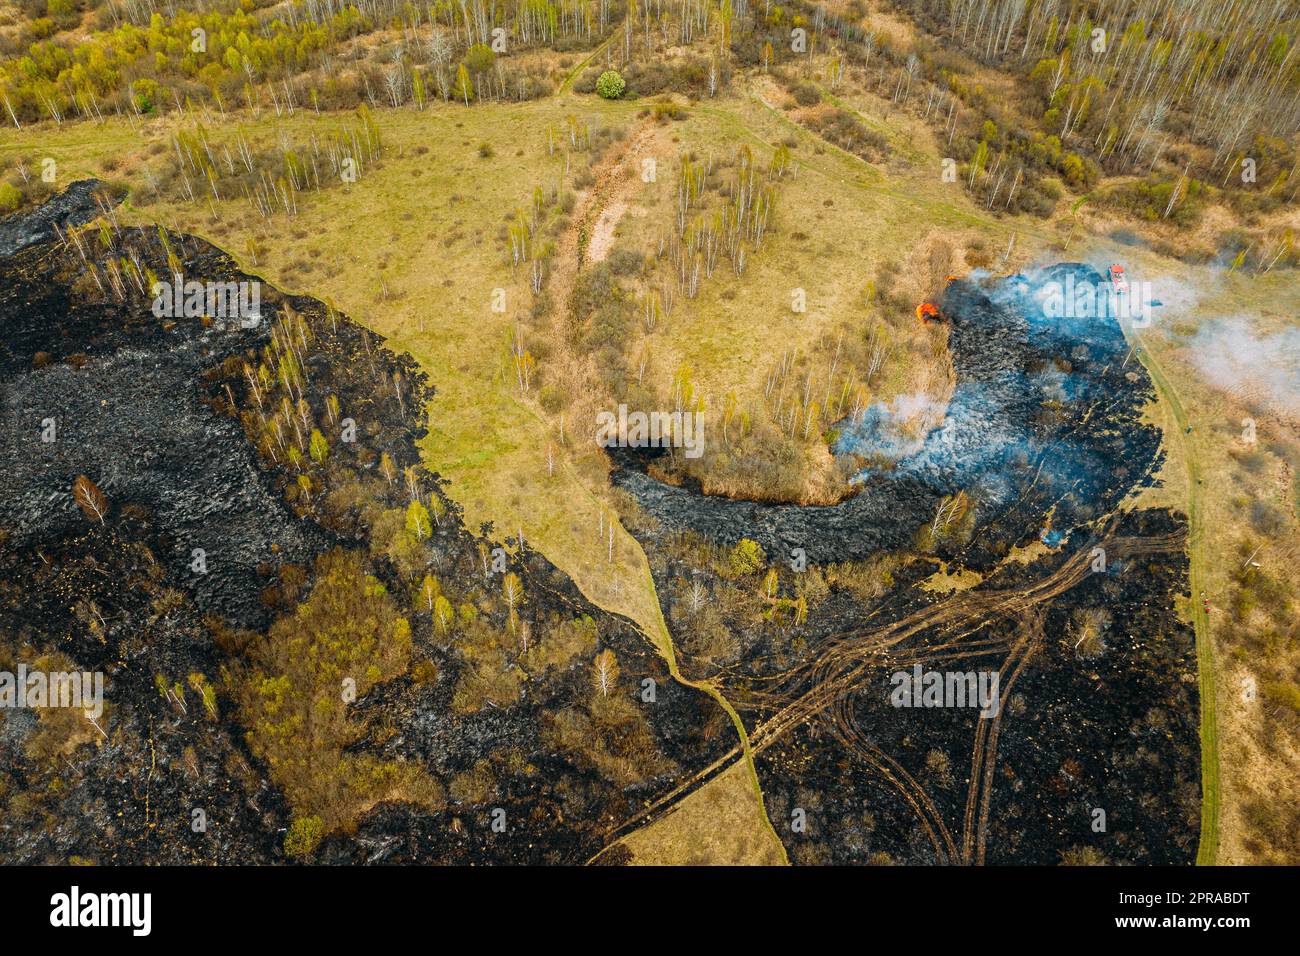 Aerial View. Spring Dry Grass Burns During Drought Hot Weather. Bush Fire And Smoke In Forest. Wild Open Fire Destroys Grass. Nature In Danger. Ecological Problem Air Pollution. Natural Disaster. Stock Photo